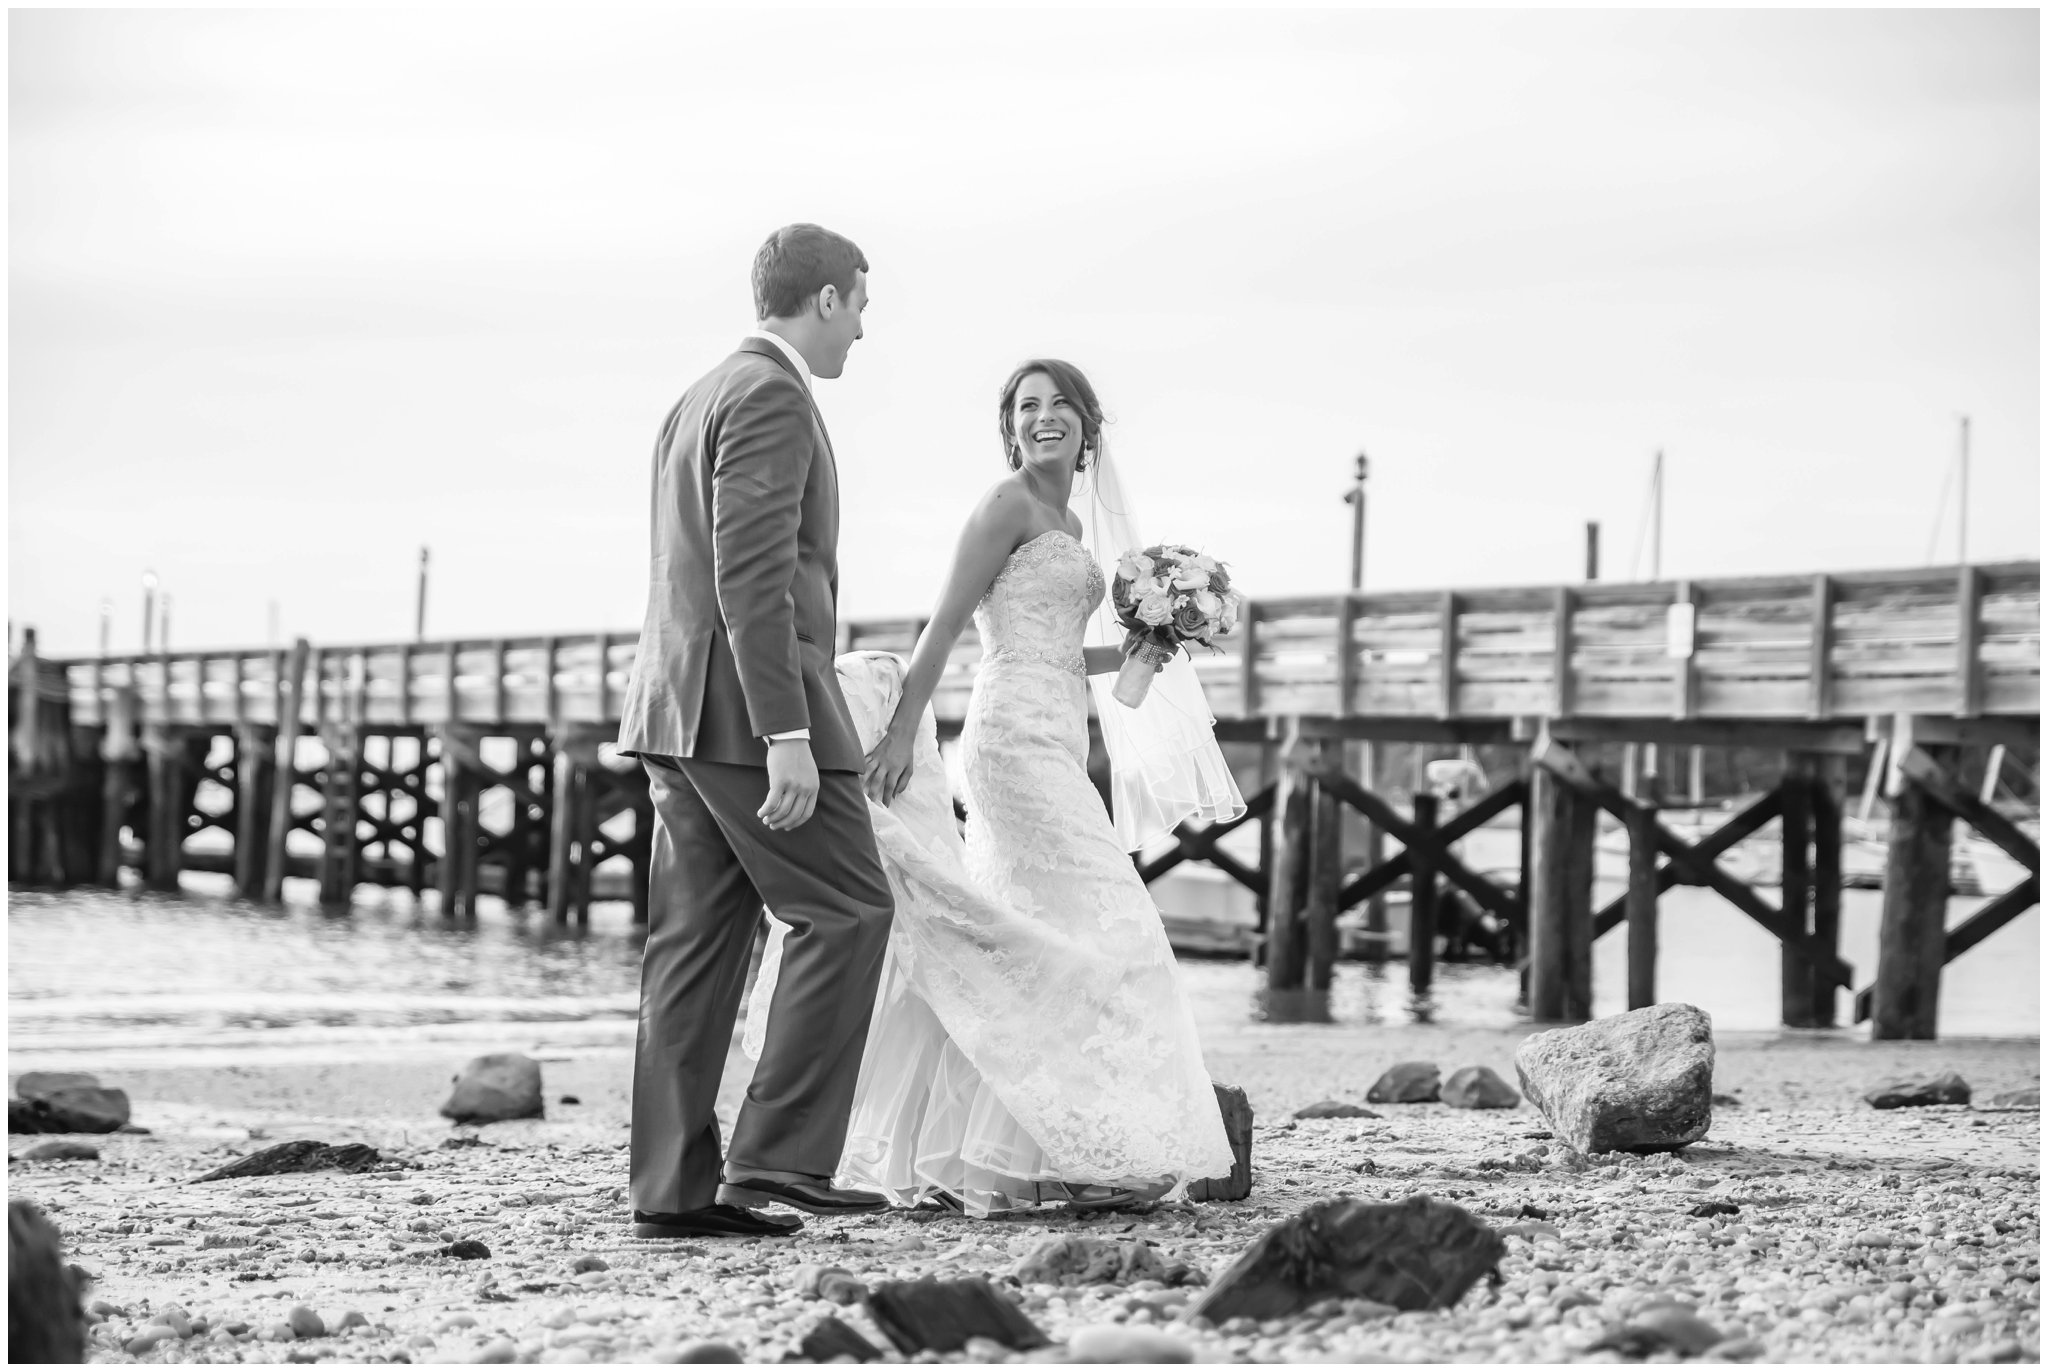 The Wedding Day Timeline - Laura Lee Photography